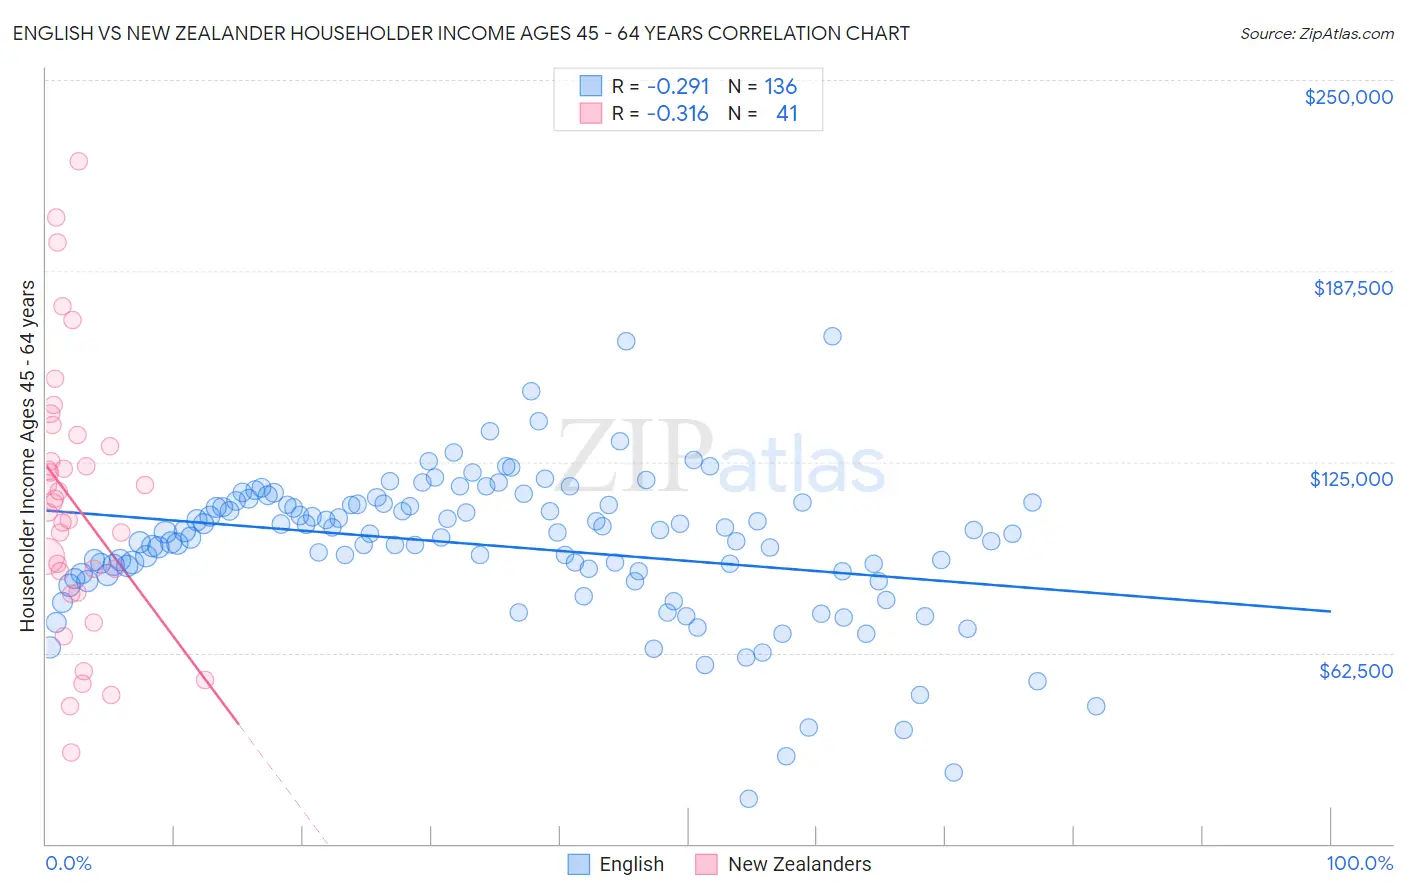 English vs New Zealander Householder Income Ages 45 - 64 years